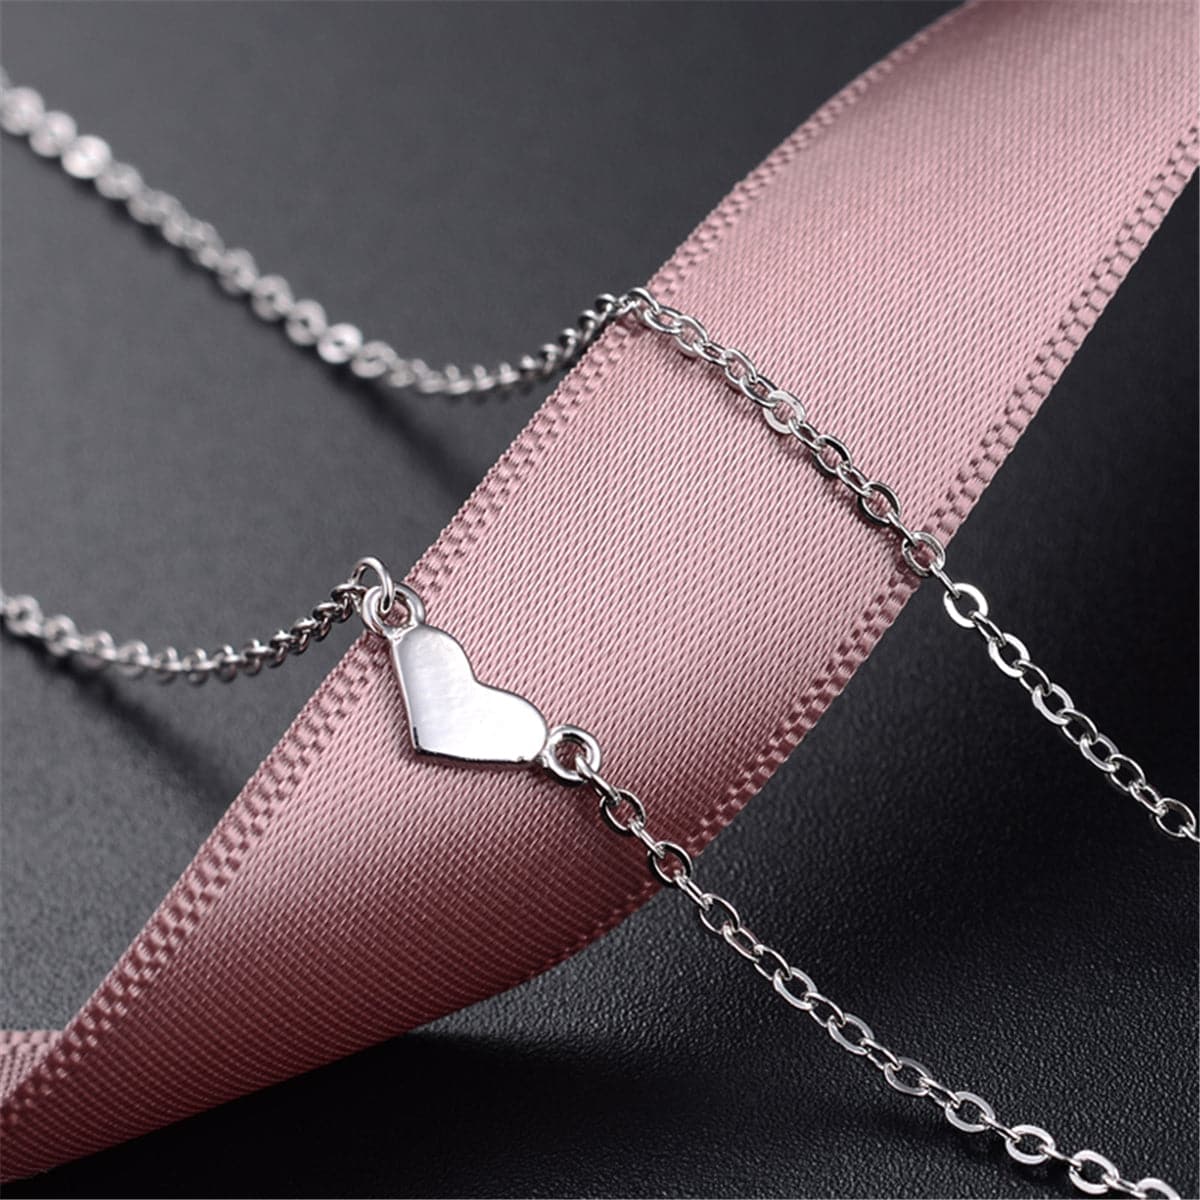 Cubic Zirconia & Sterling Silver Hola Heart Pendant Necklace